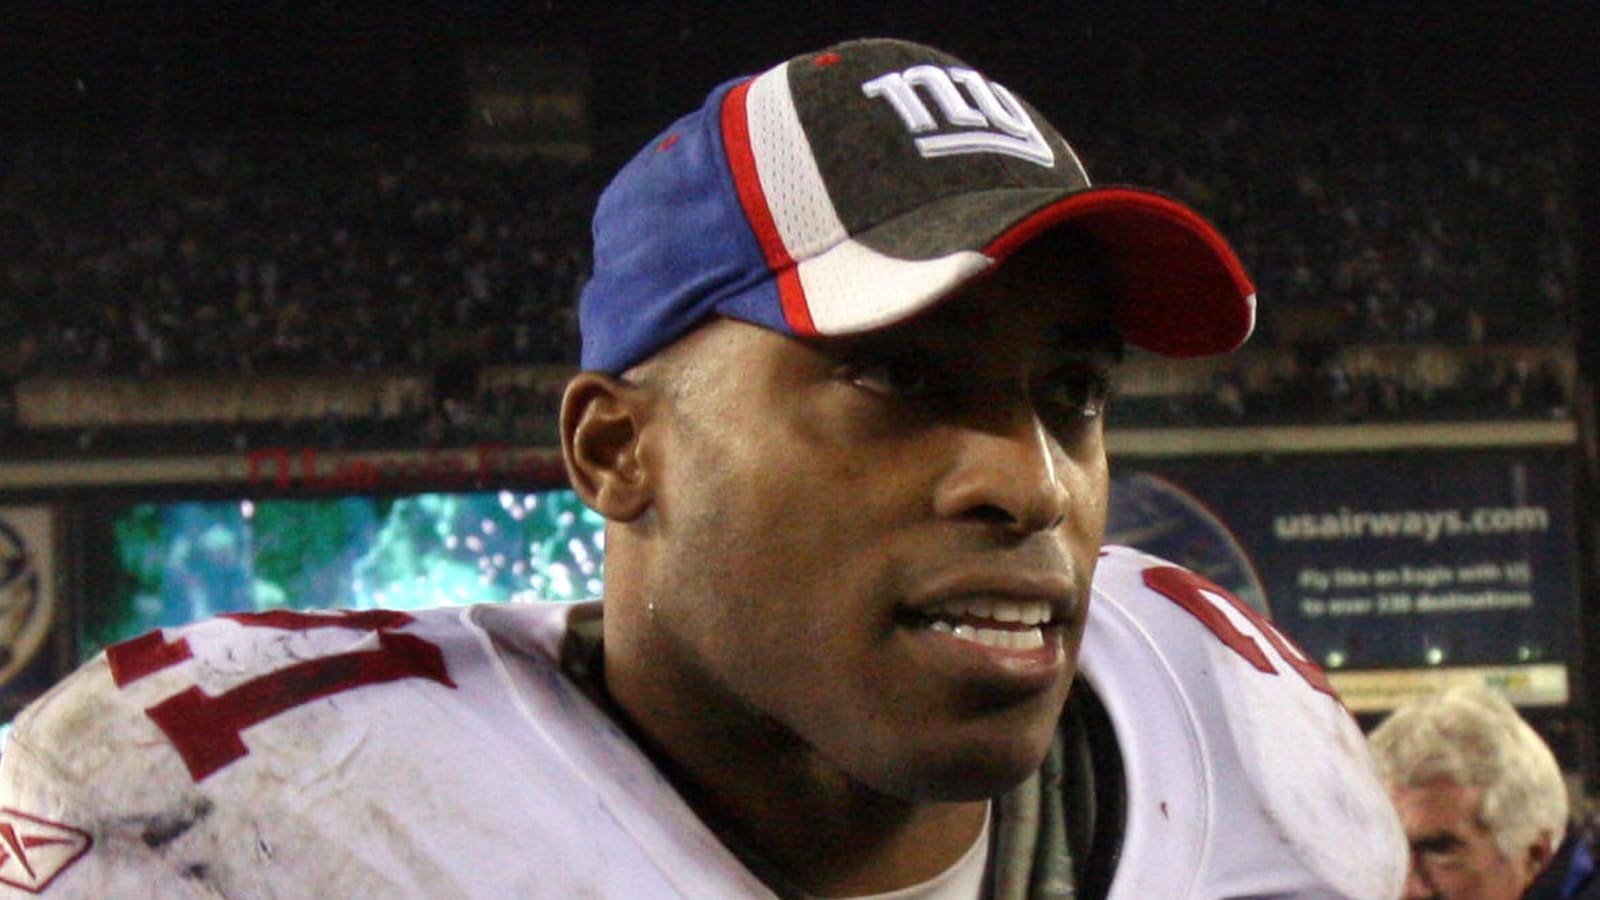 Former Giants star: New York thought about playoffs 'way too soon'